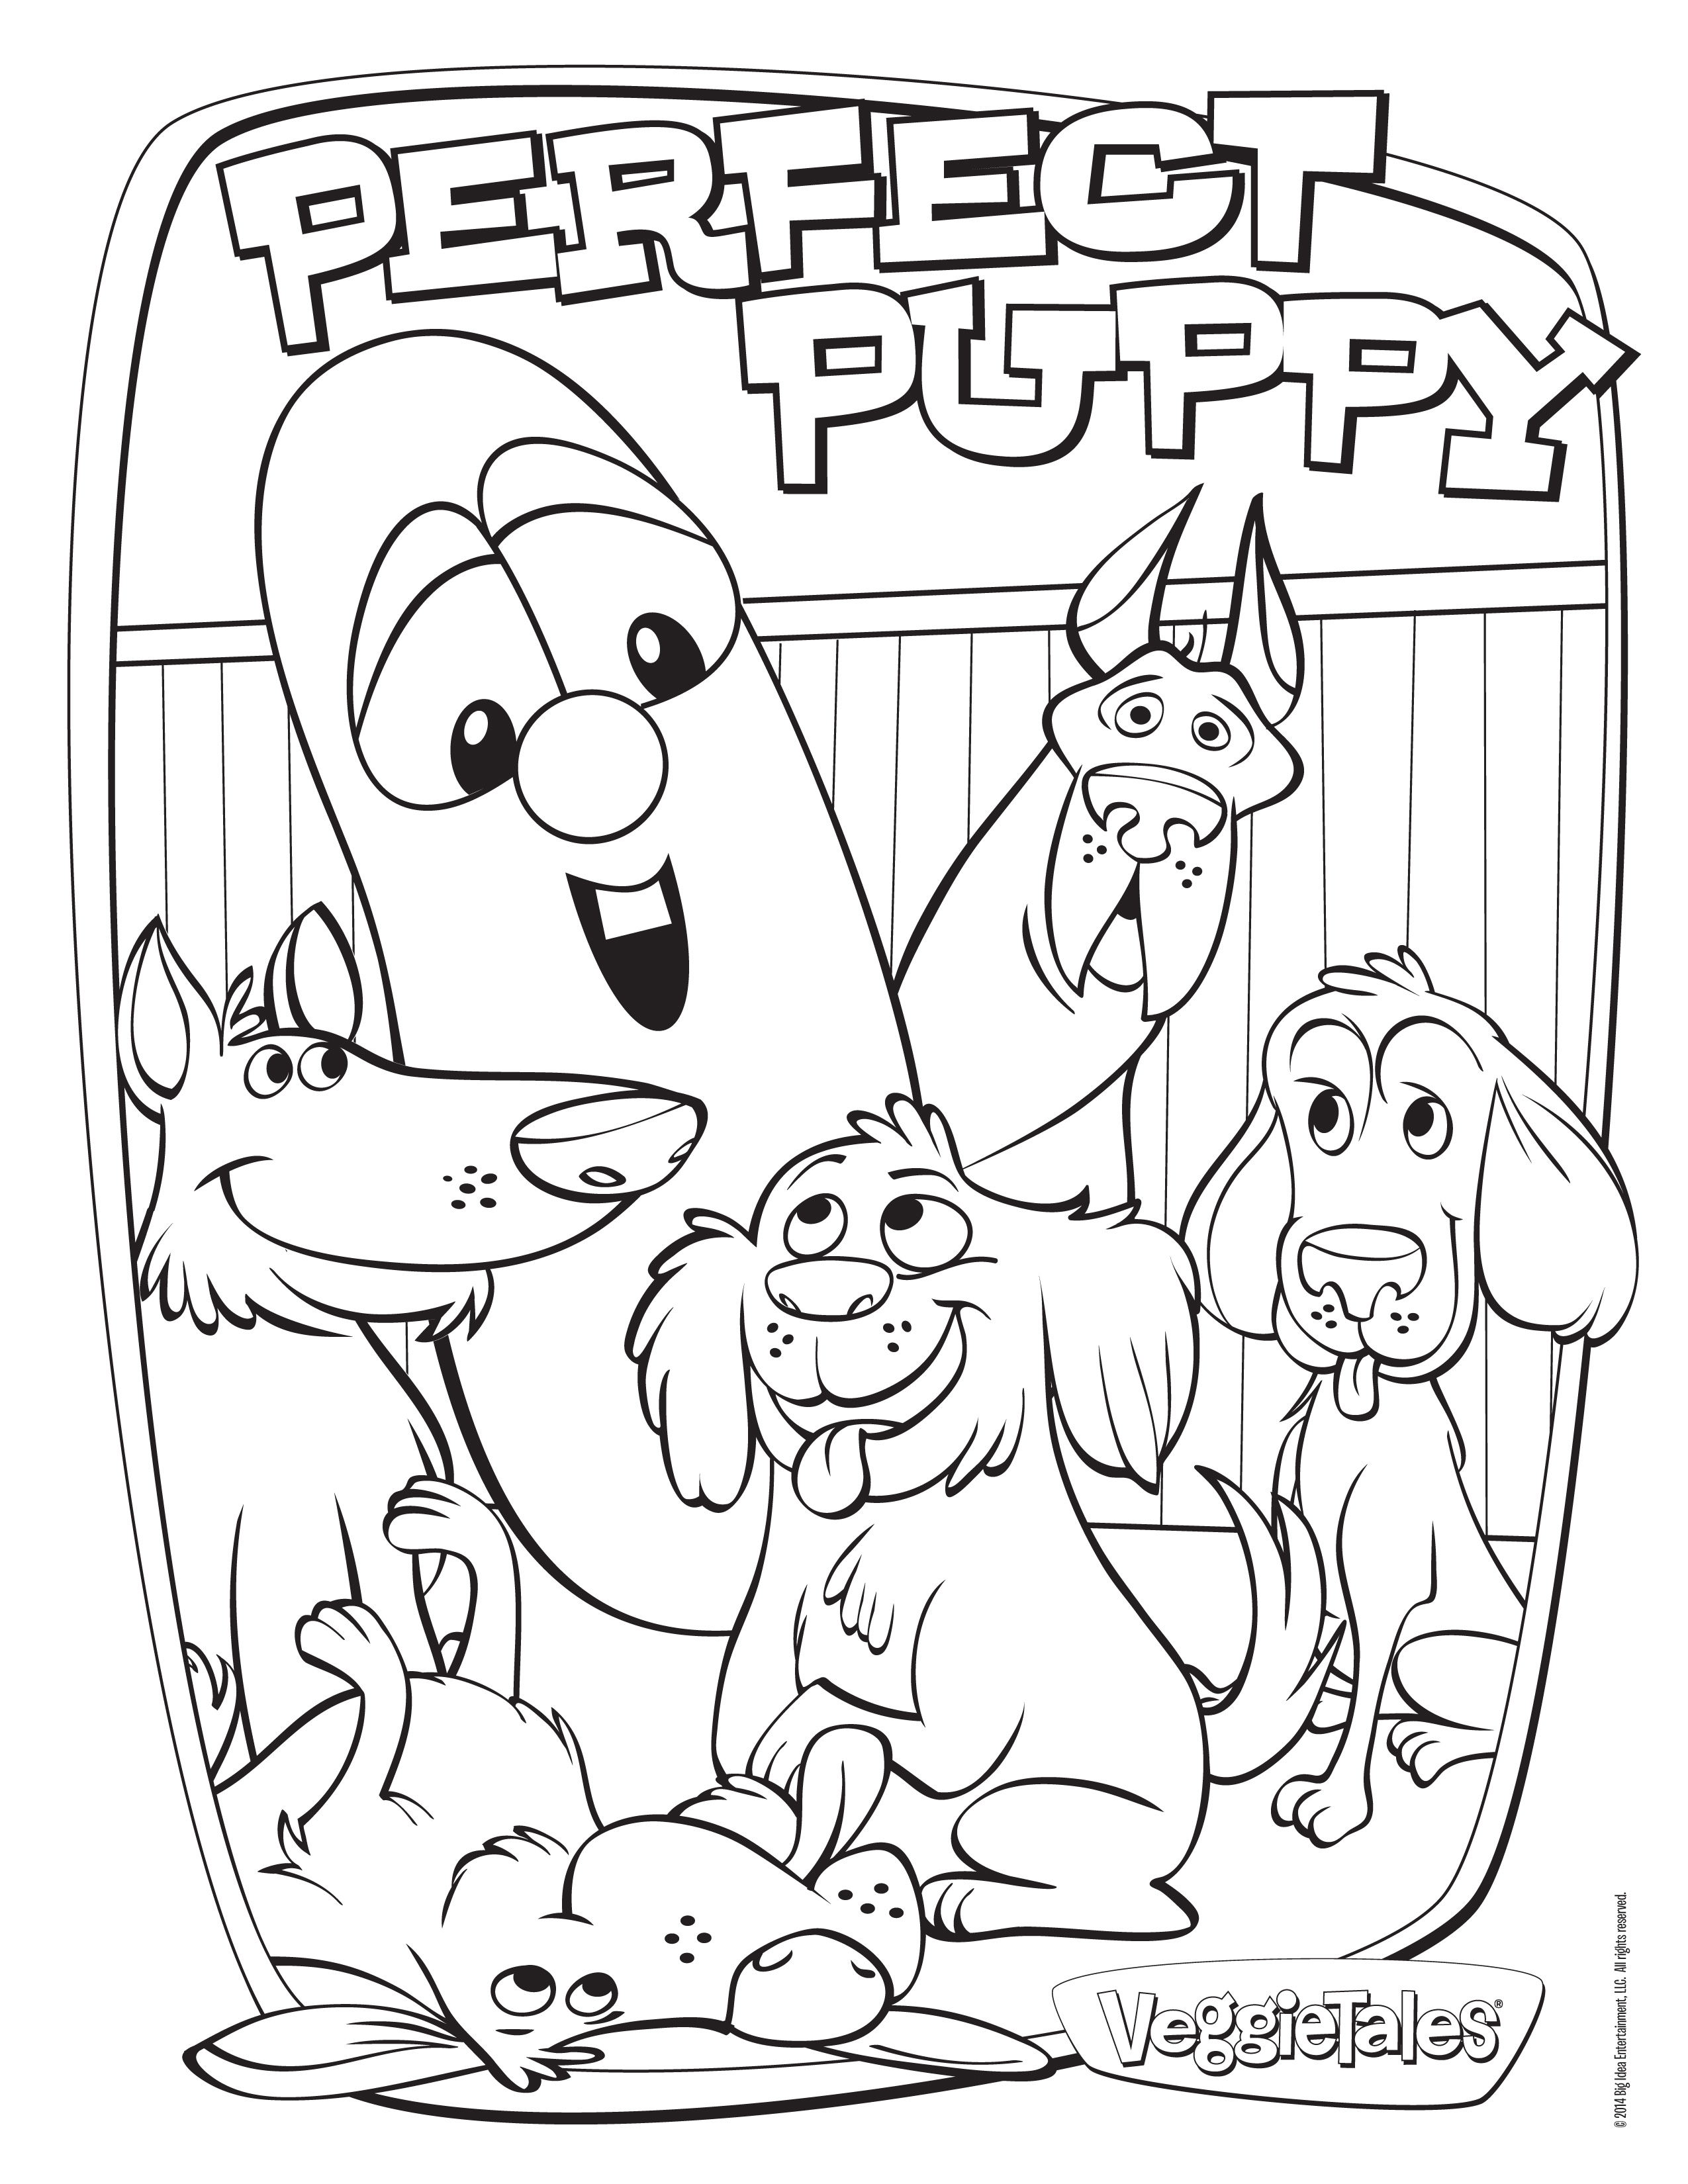 veggie-tales-coloring-pages-download-and-print-for-free